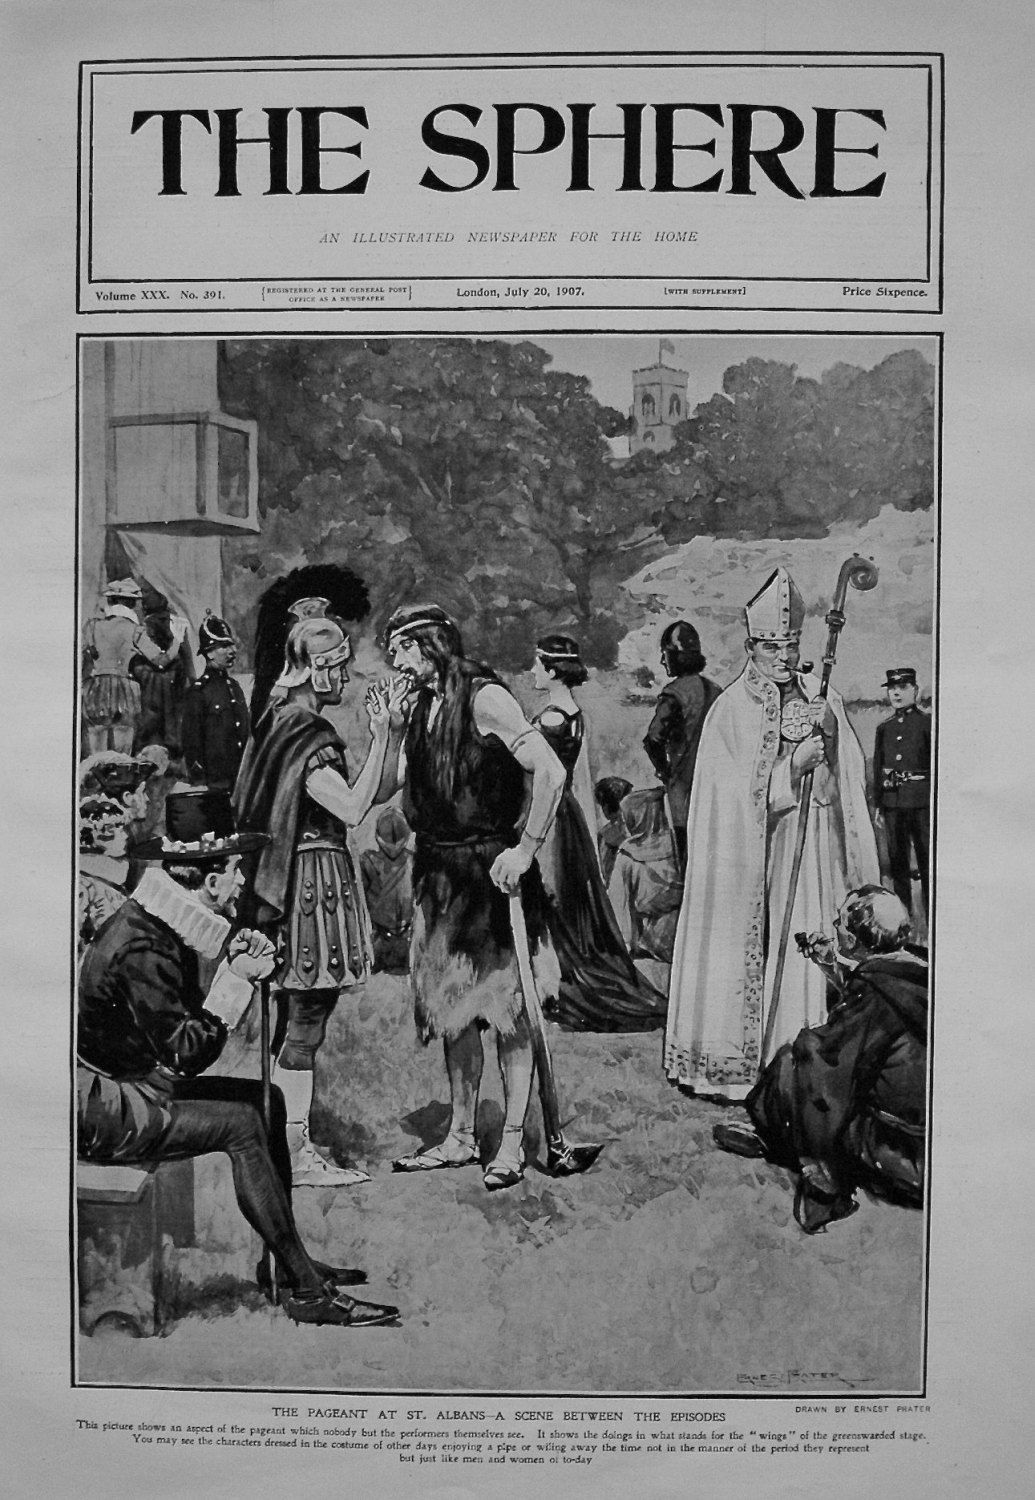 Pageant at St. Albans - A Scene between the Episodes. 1907